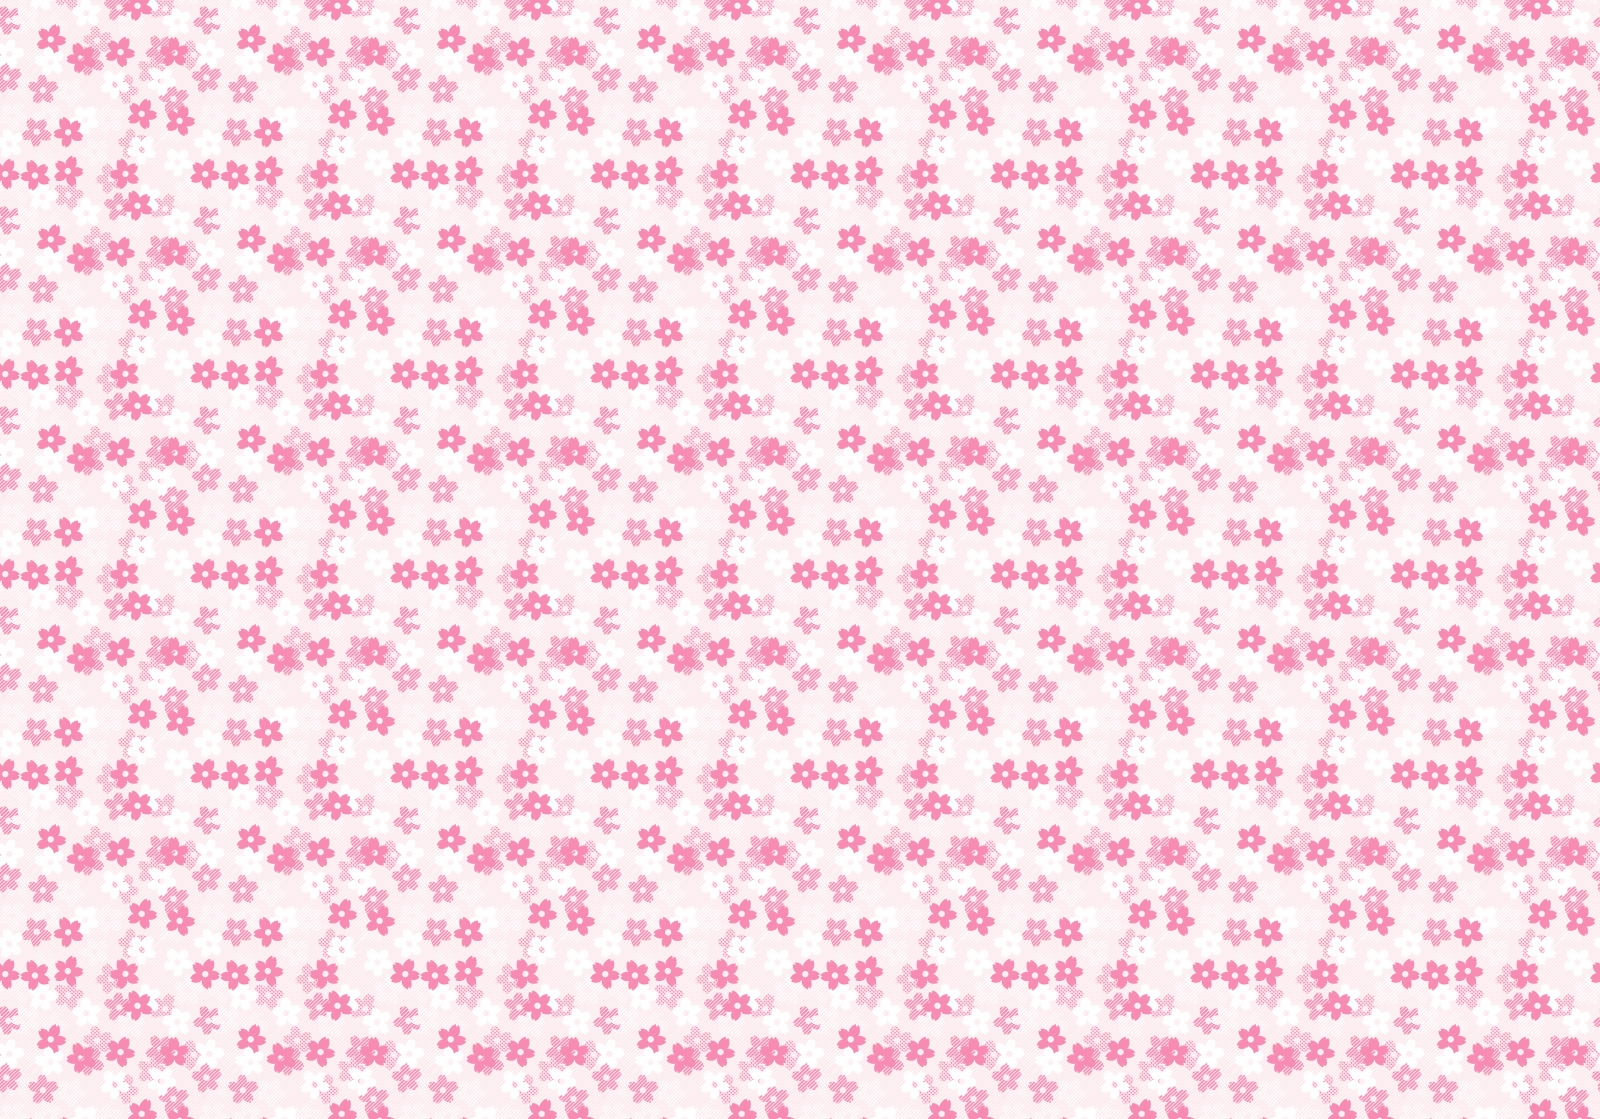 1920x1080 Background pink, flowers, texture, textures, surface